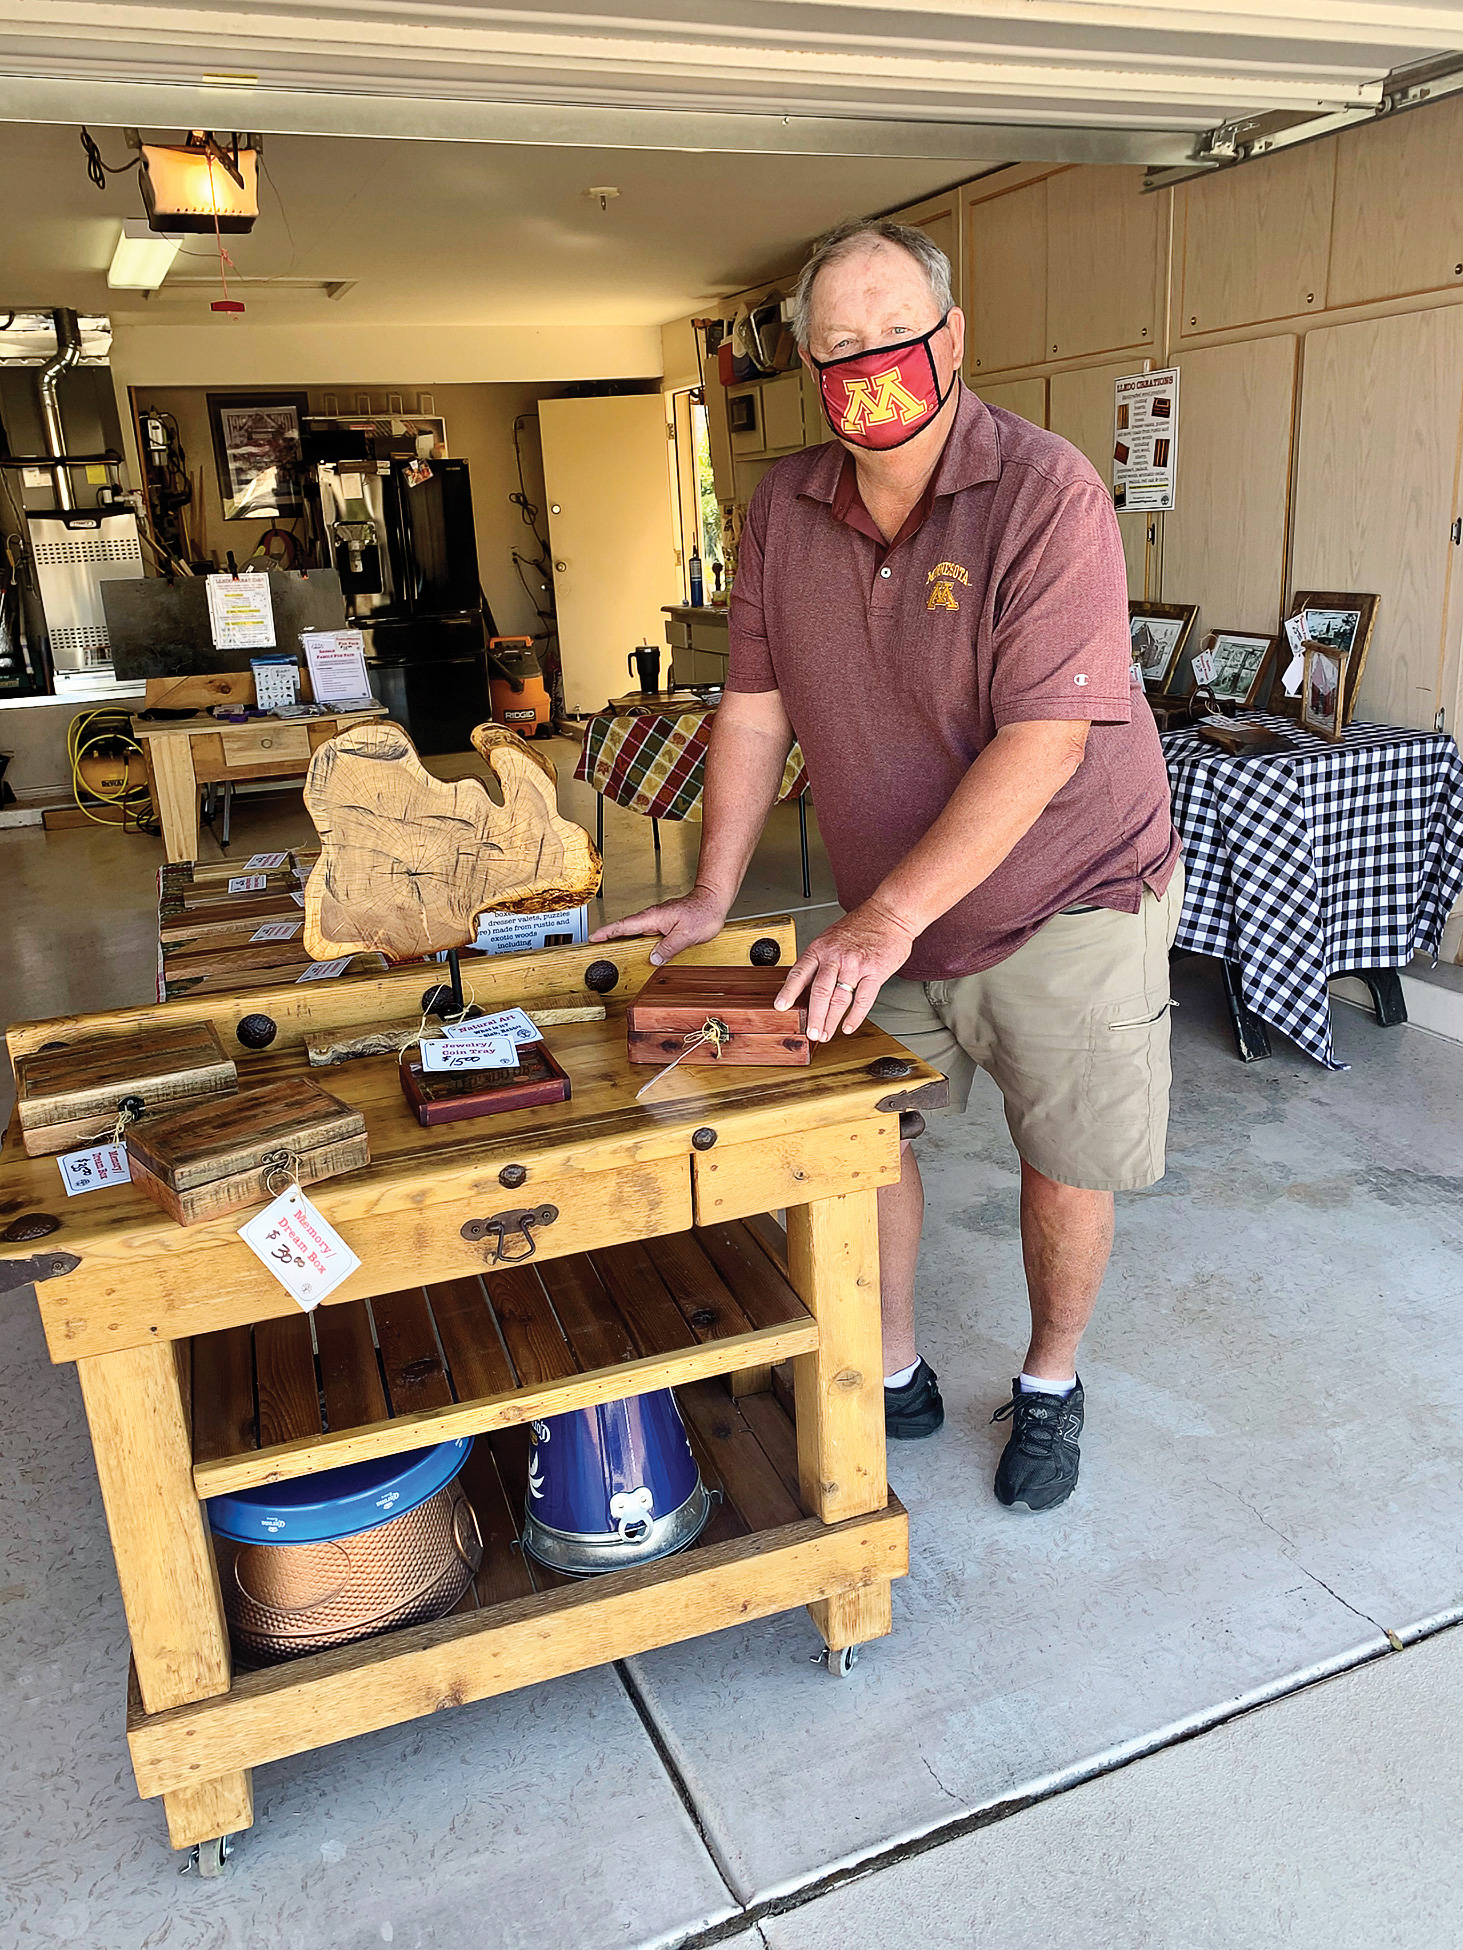 Mike O’Dell with his display of wooden creations.